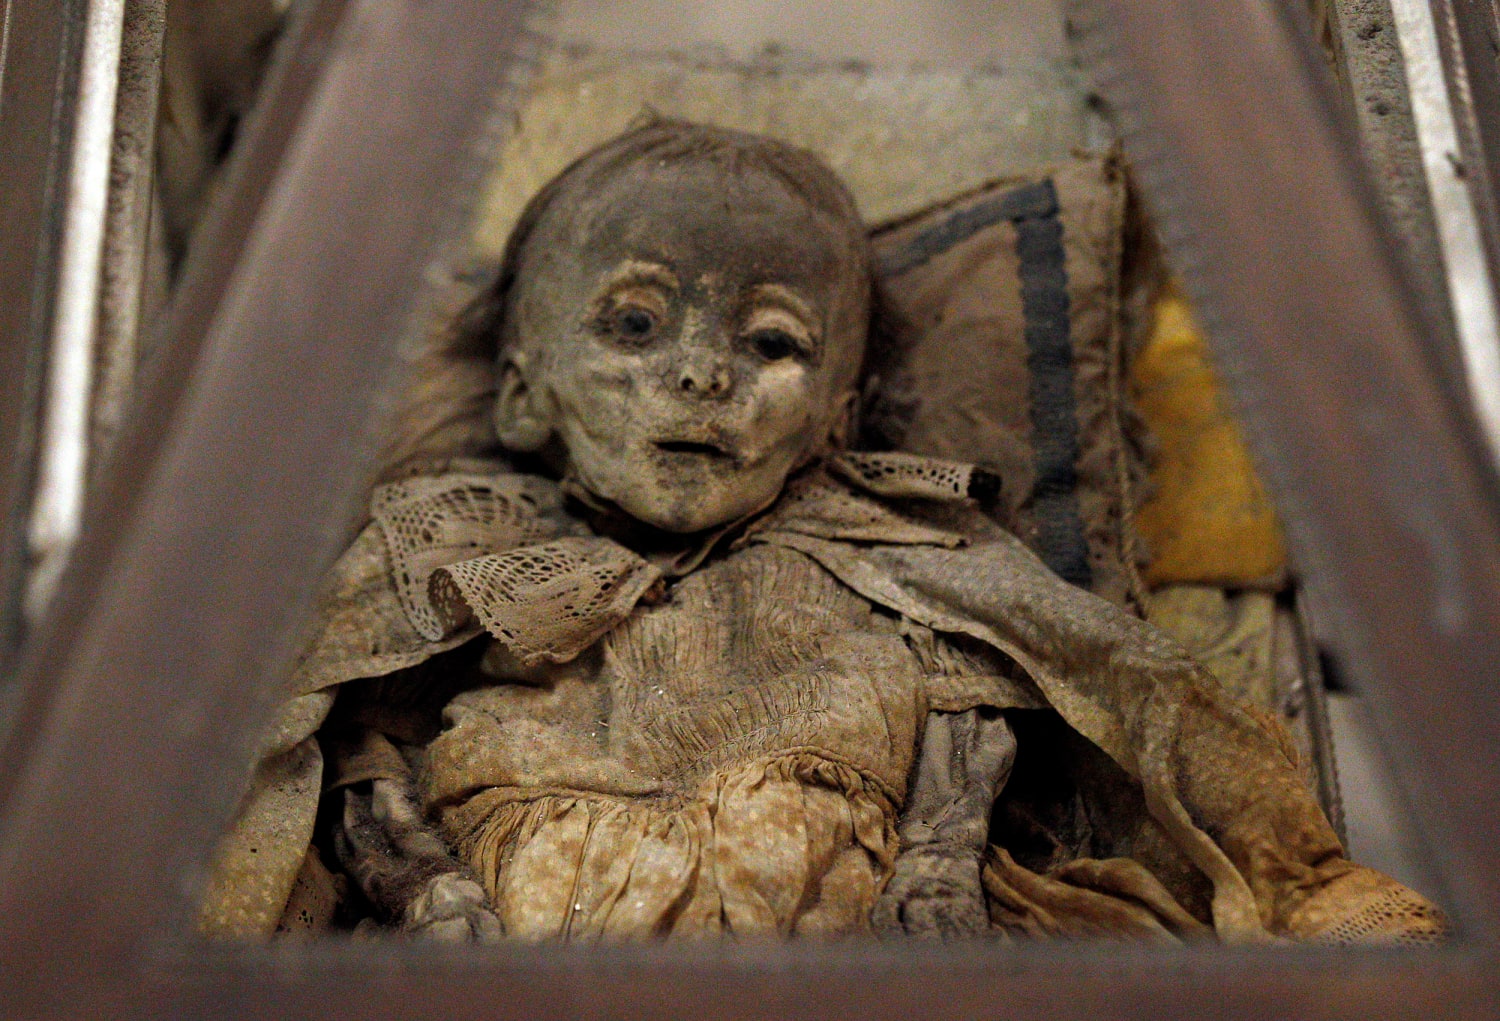 Sicily’s child mummies are a grisly mystery. Scientists want to learn their stories.